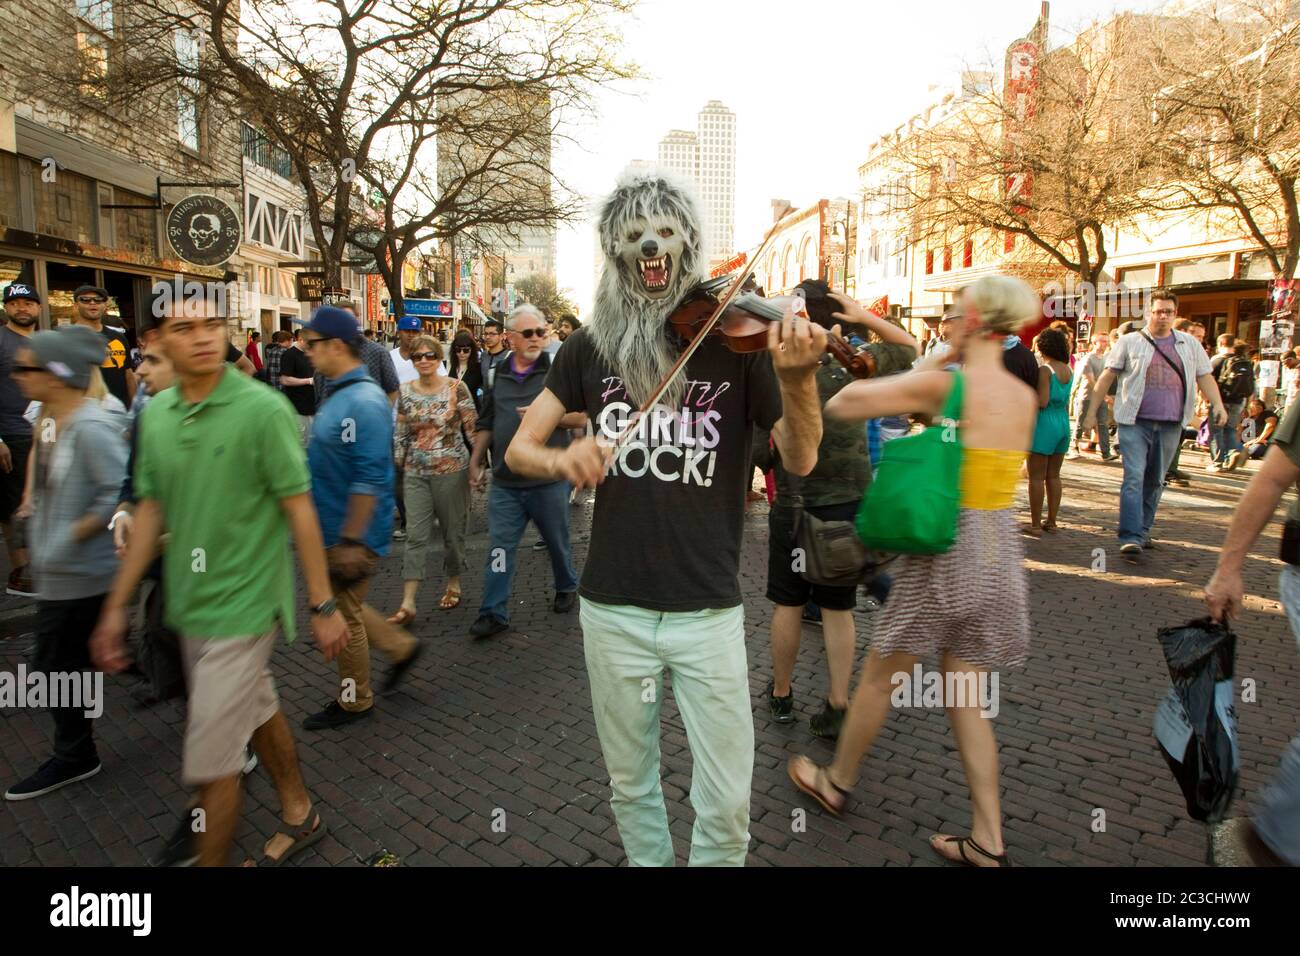 Austin, Texas USA, March 2013: Eccentric white male wearing a werewolf mask plays the violin outdoors in downtown Austin during the annual South by Southwest musical festival that draws thousands of music fans to the city. ©MKC/Bob Daemmrich Photography, Inc. Stock Photo